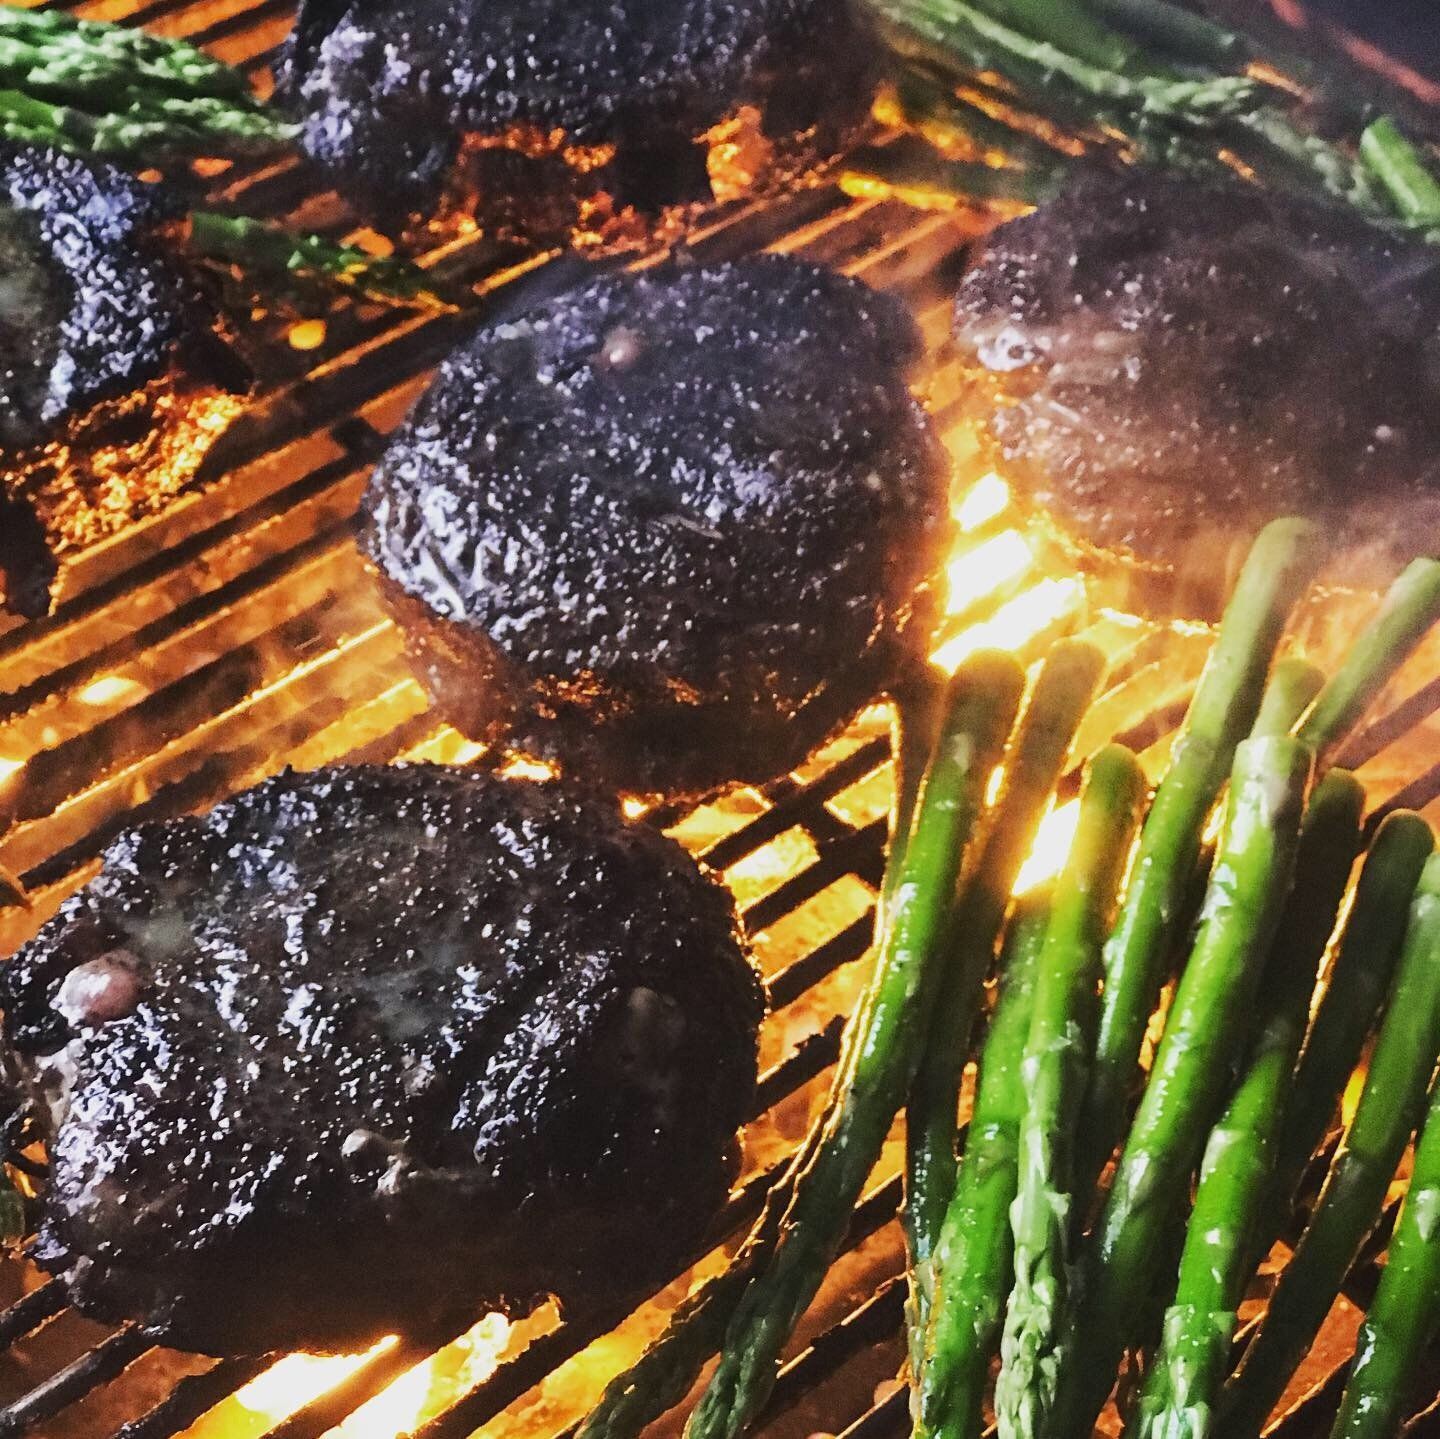 grilled steak and asparagus